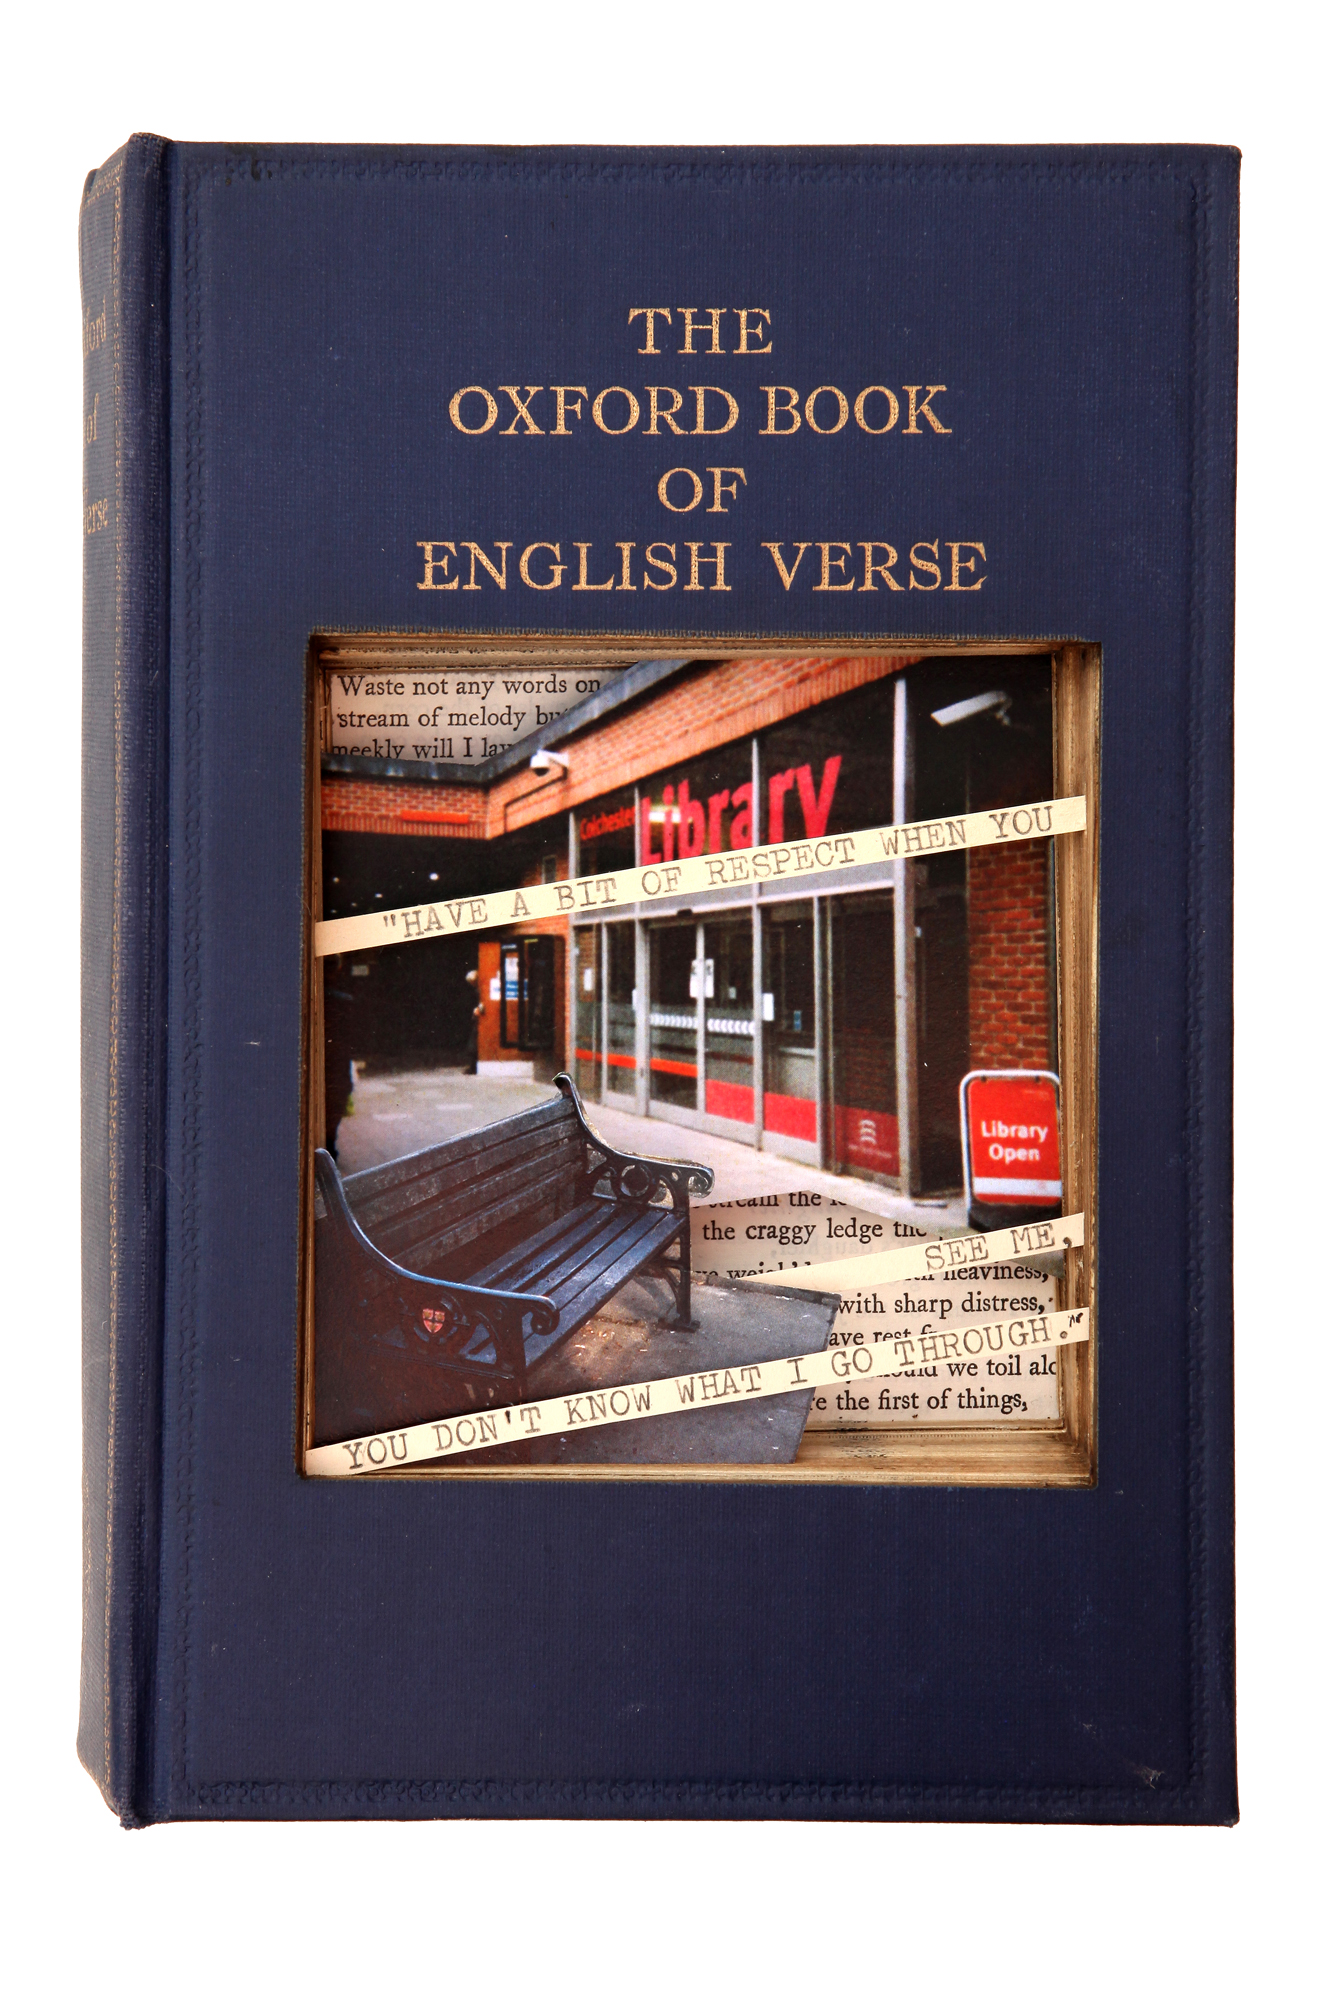 The Oxford Book of English Verse by Christopher Ricks